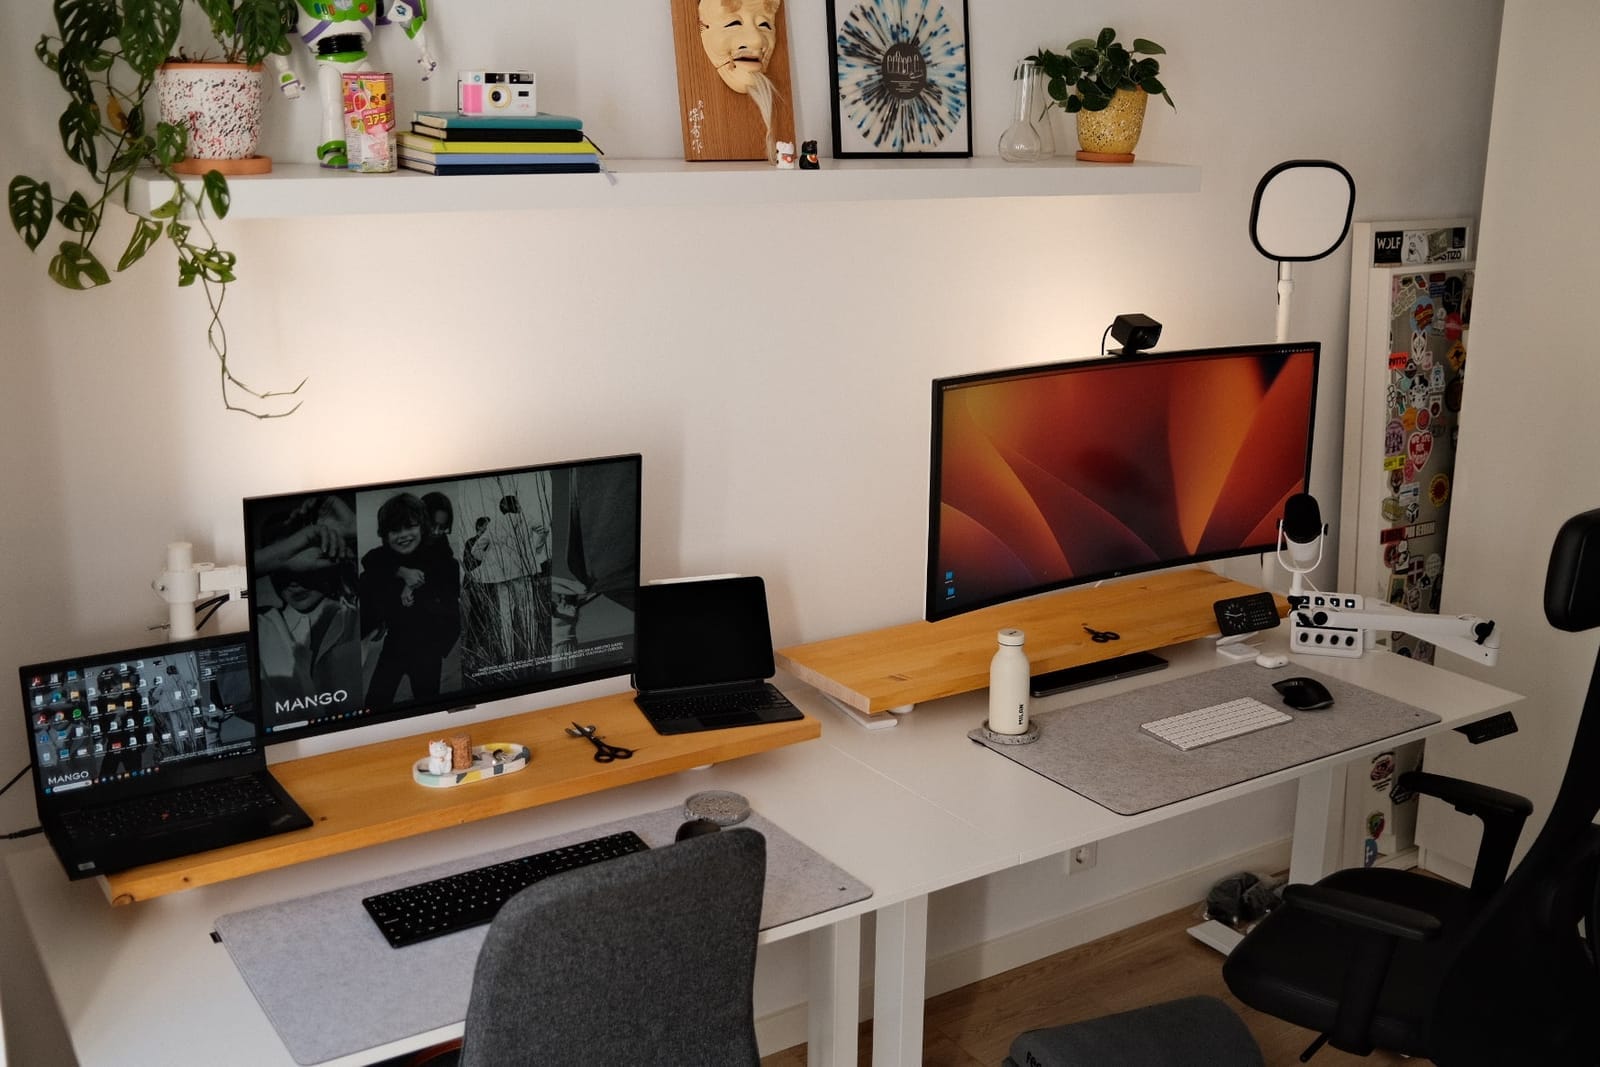 A shared home office desk setup with classic neutral white walls